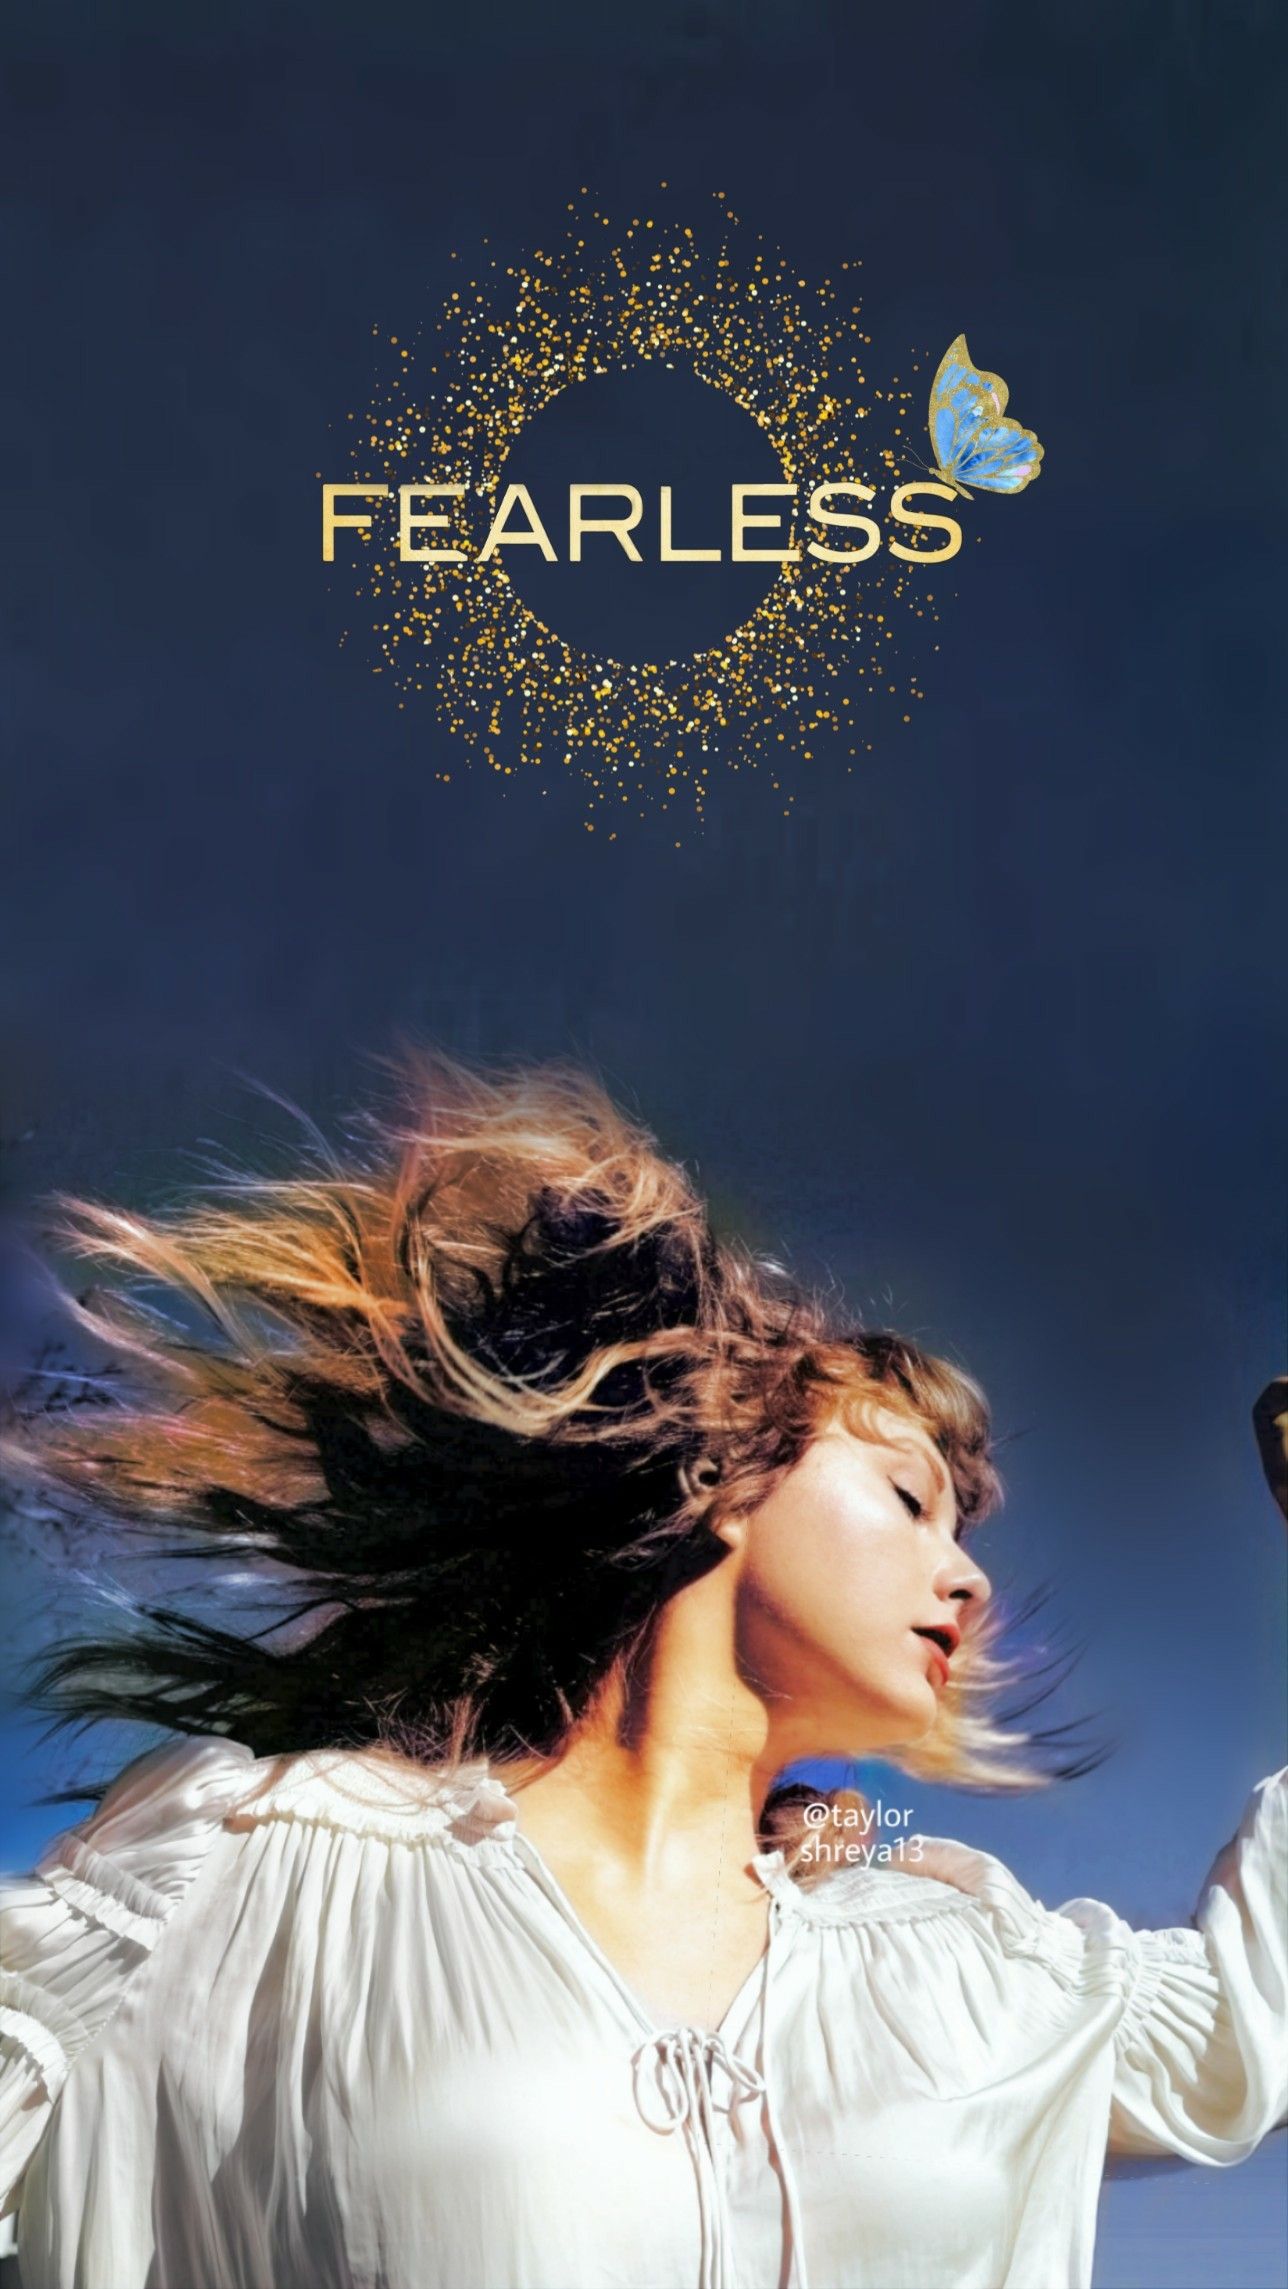 Fearless (Taylor's Version) wallpaper. Taylor swift wallpaper, Taylor, Fearless